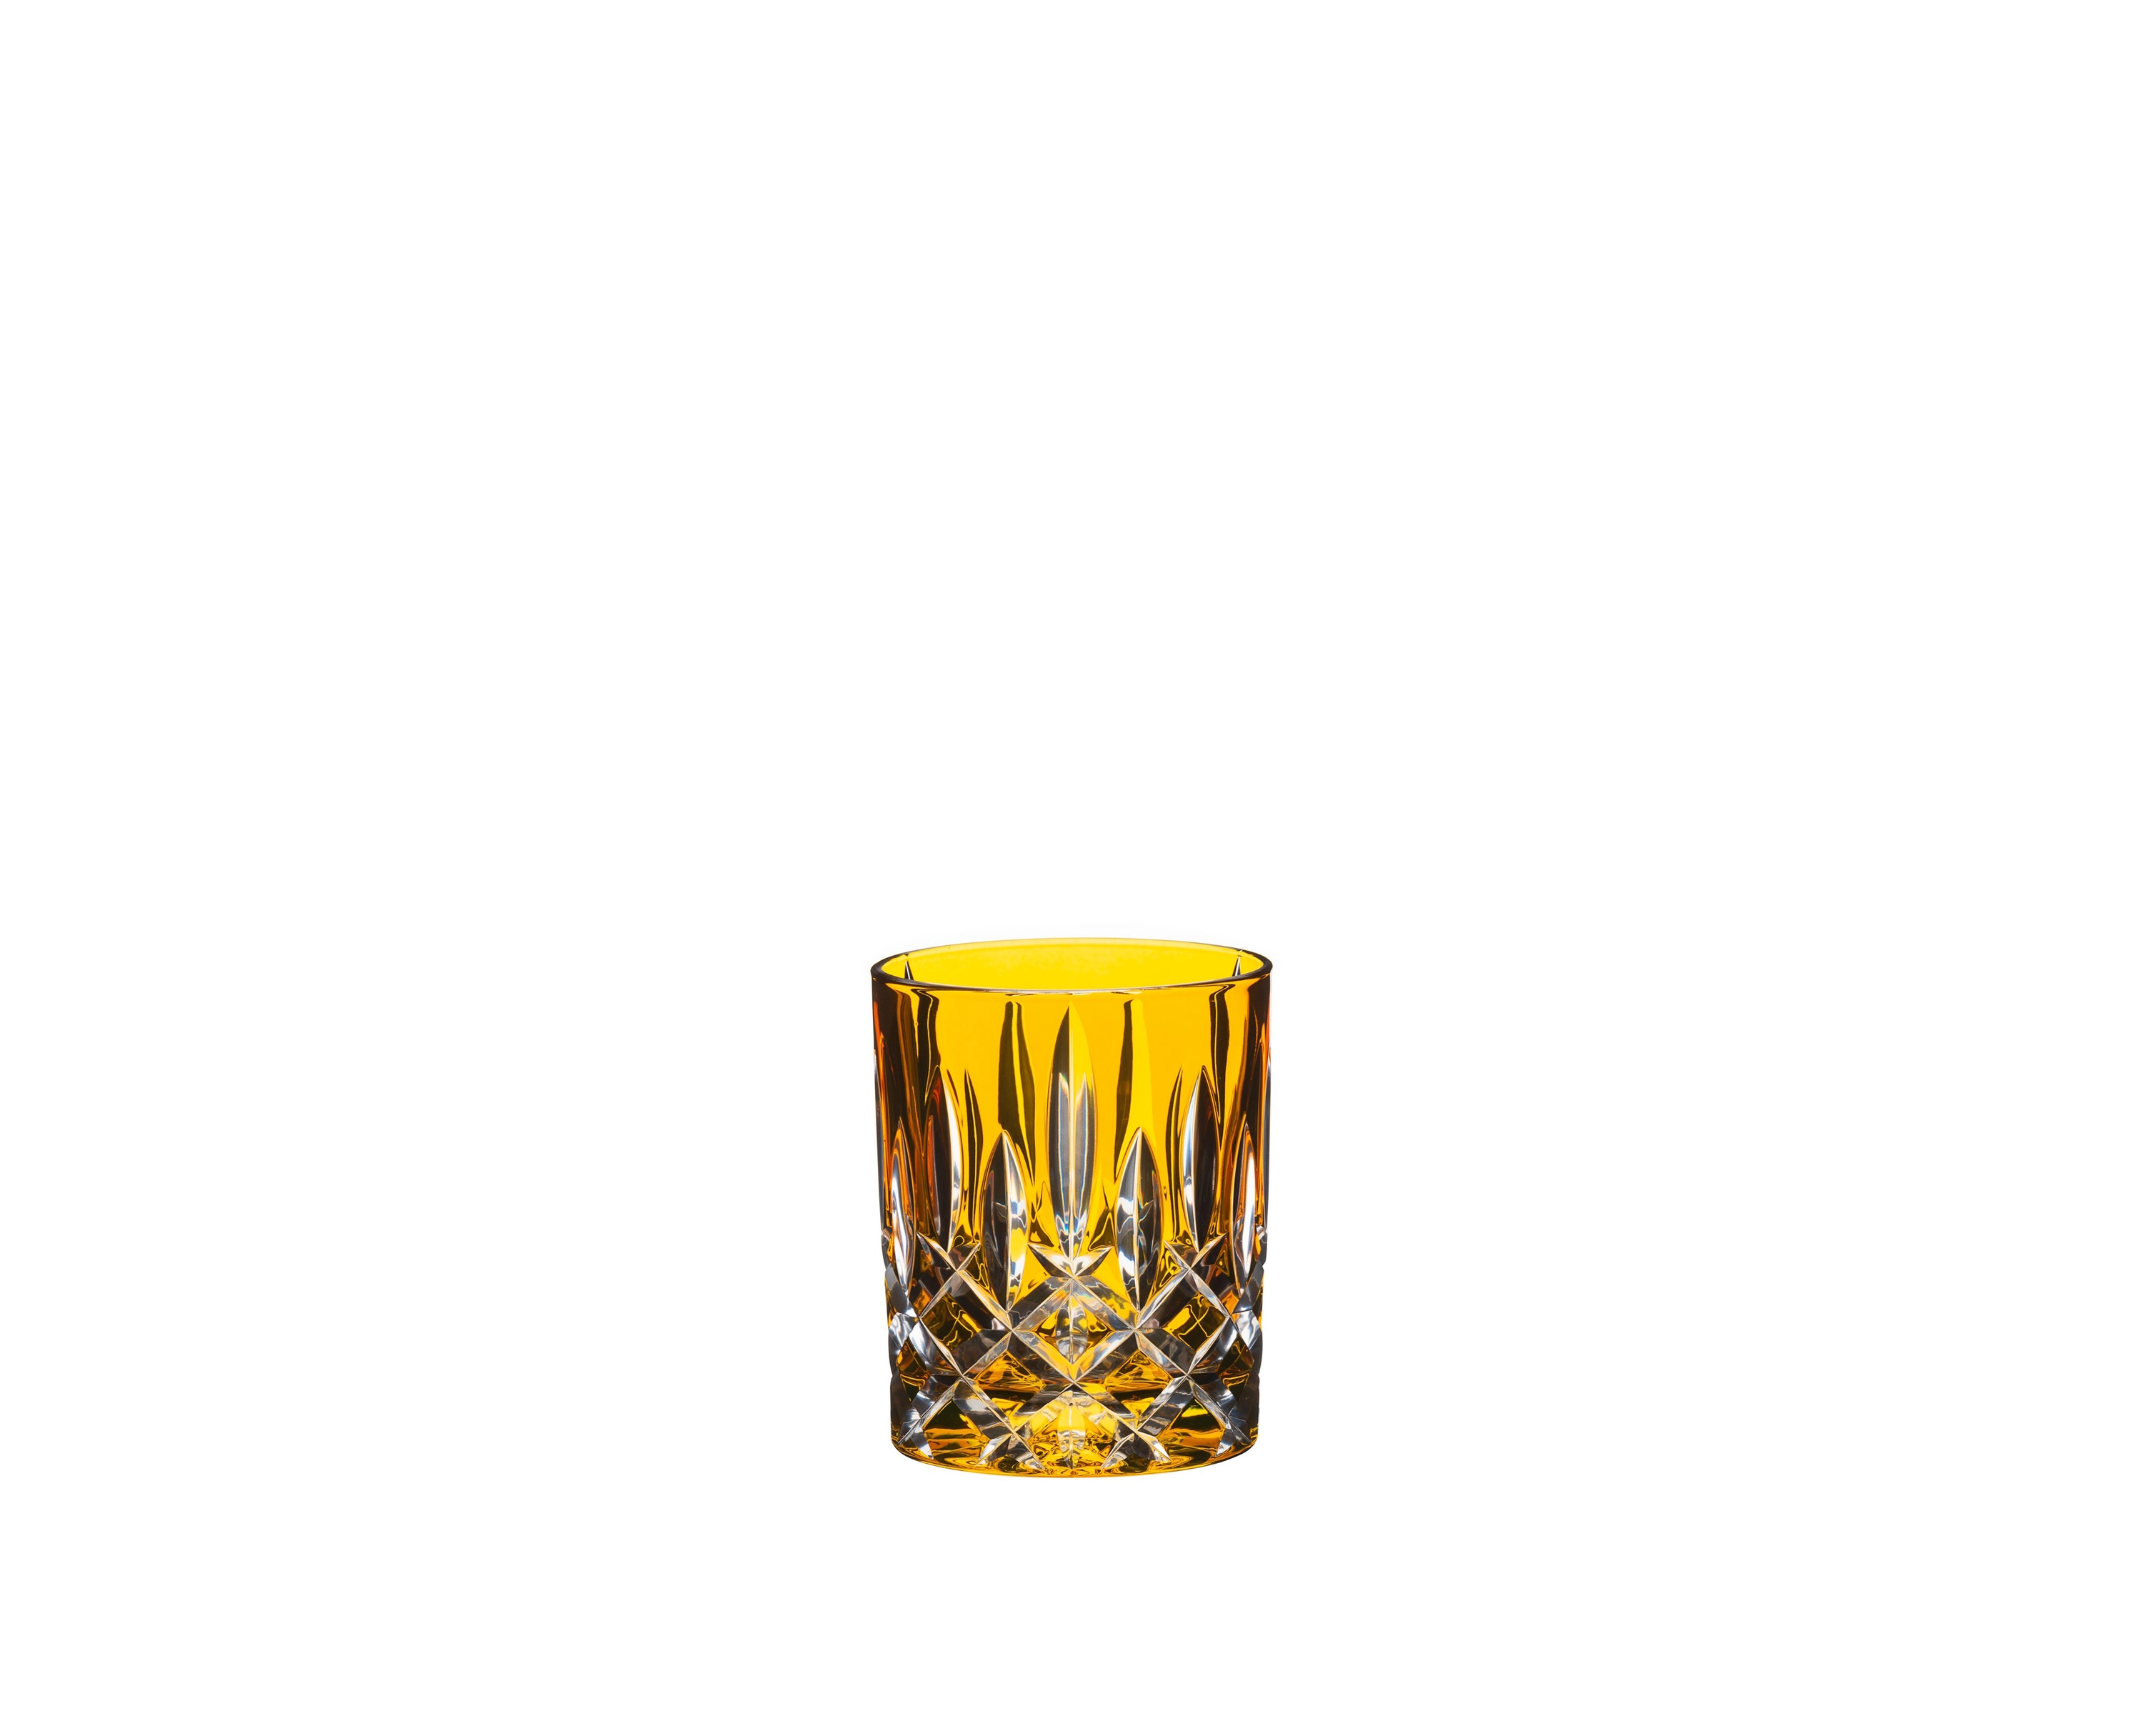 Riedel Laudon Tumbler Amber, set of 4 pieces